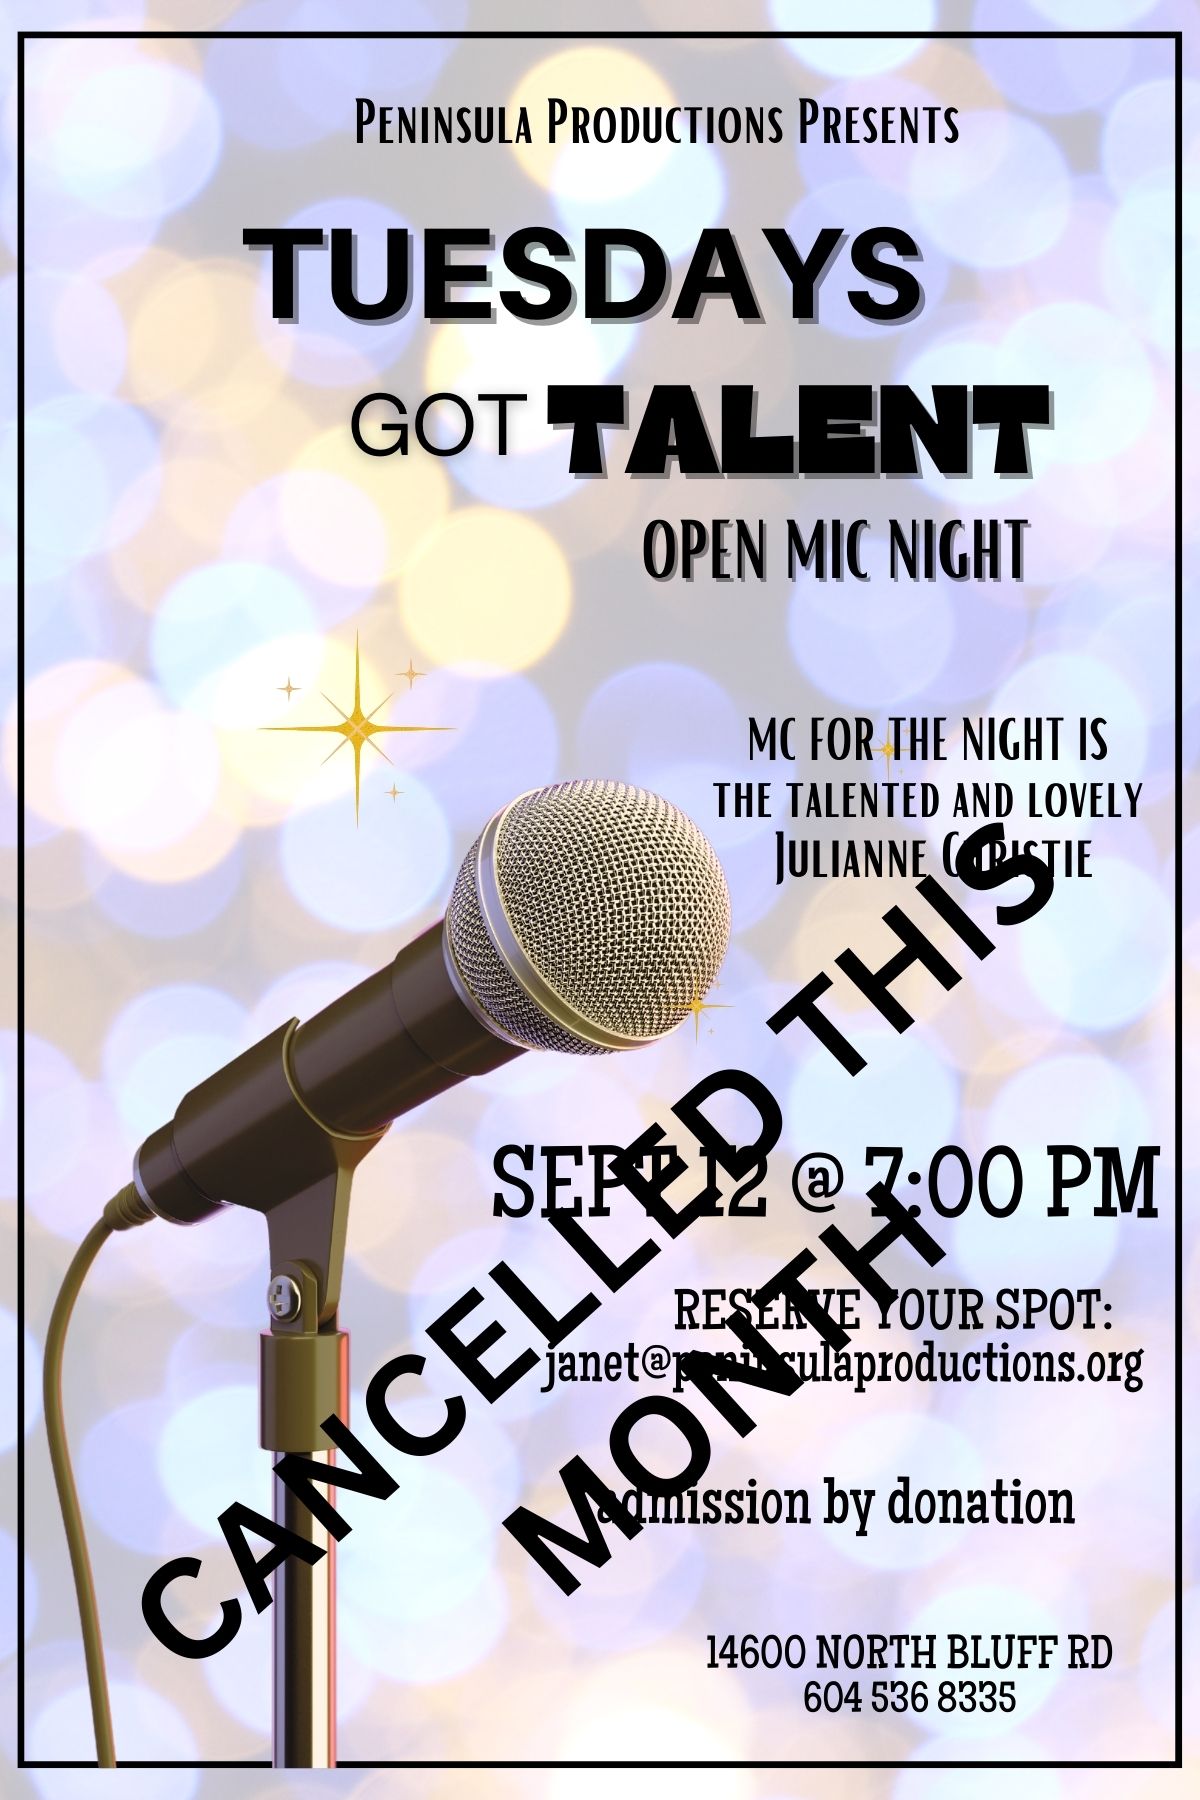 Cancelled event poster for Tuesdays Got Talent (Sept 12)